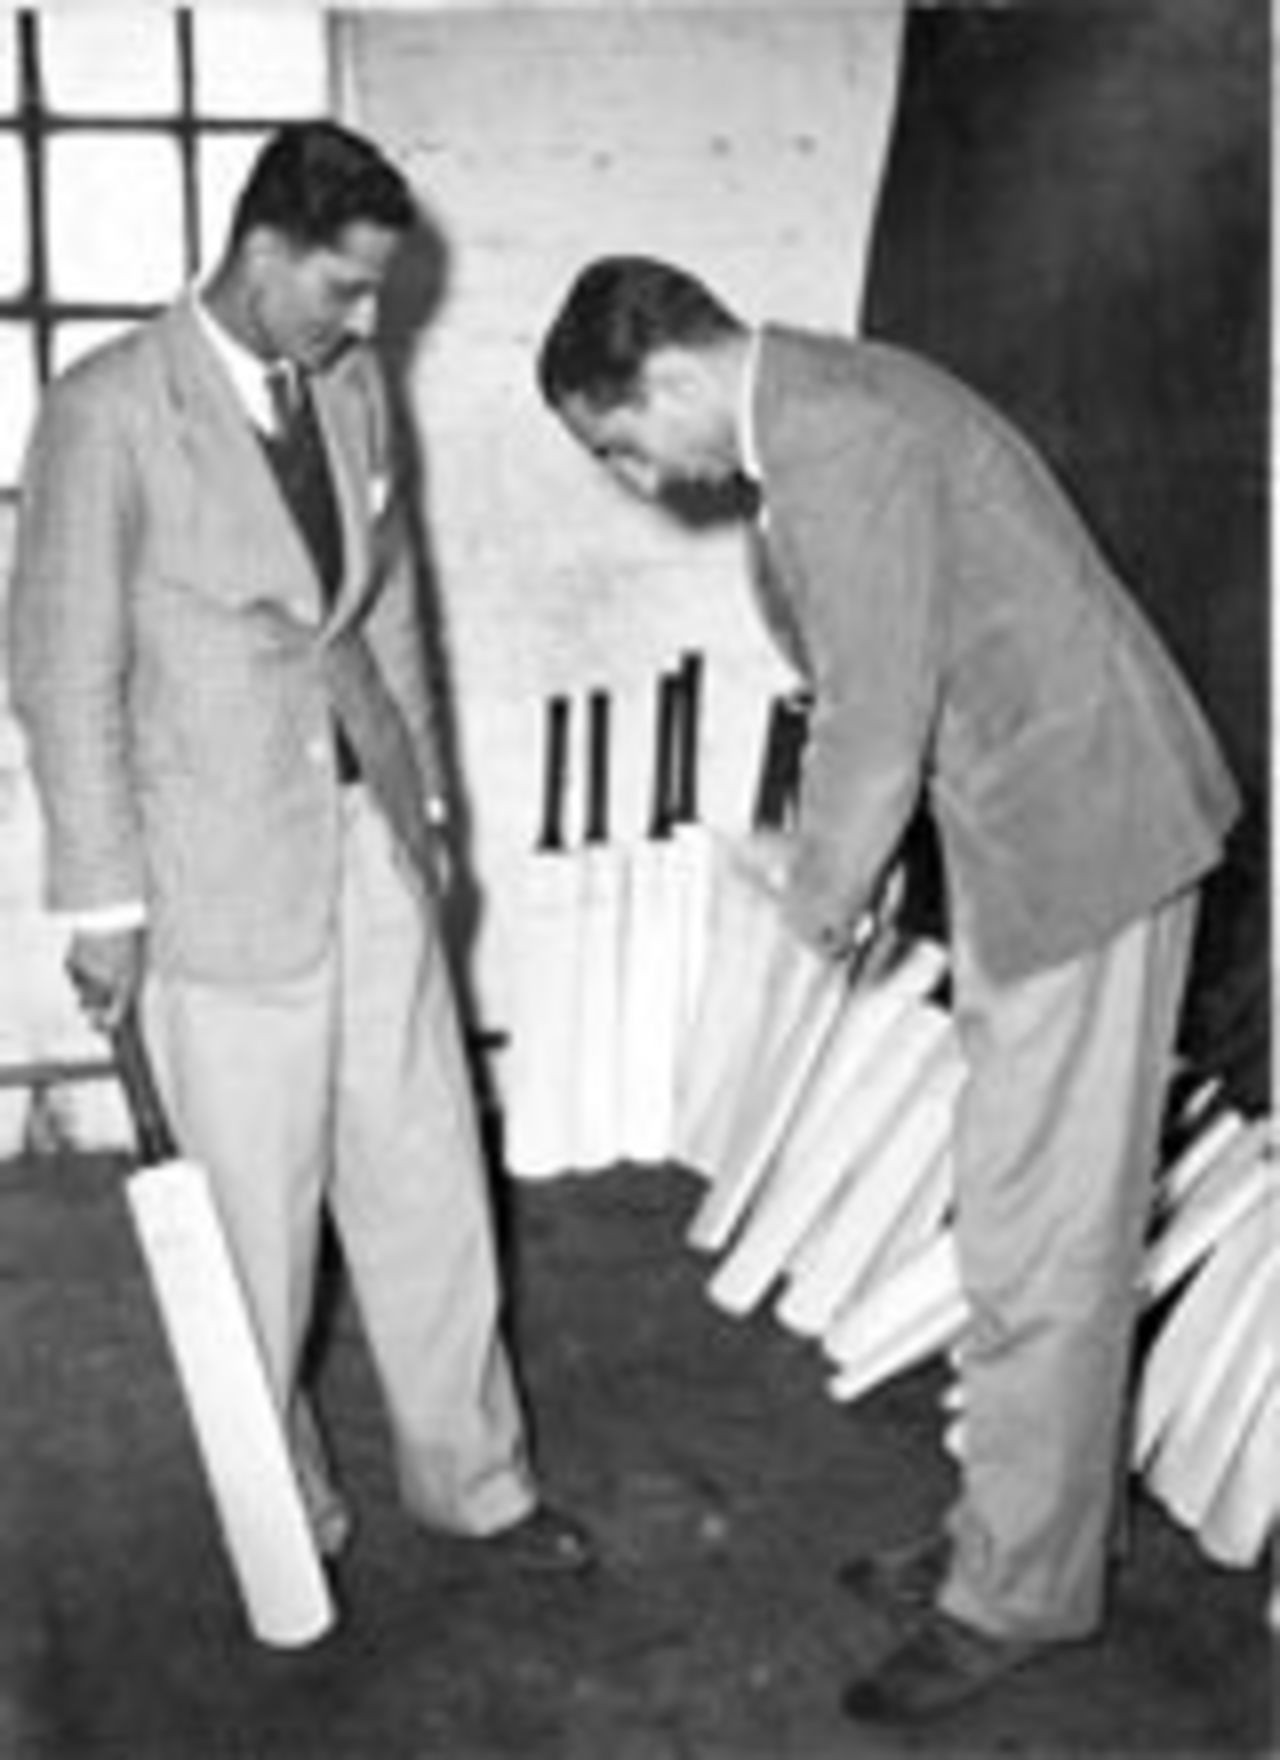 Vijay Hazare and Nawab of Pataudi Sr check out some bats during the tour to England in 1946